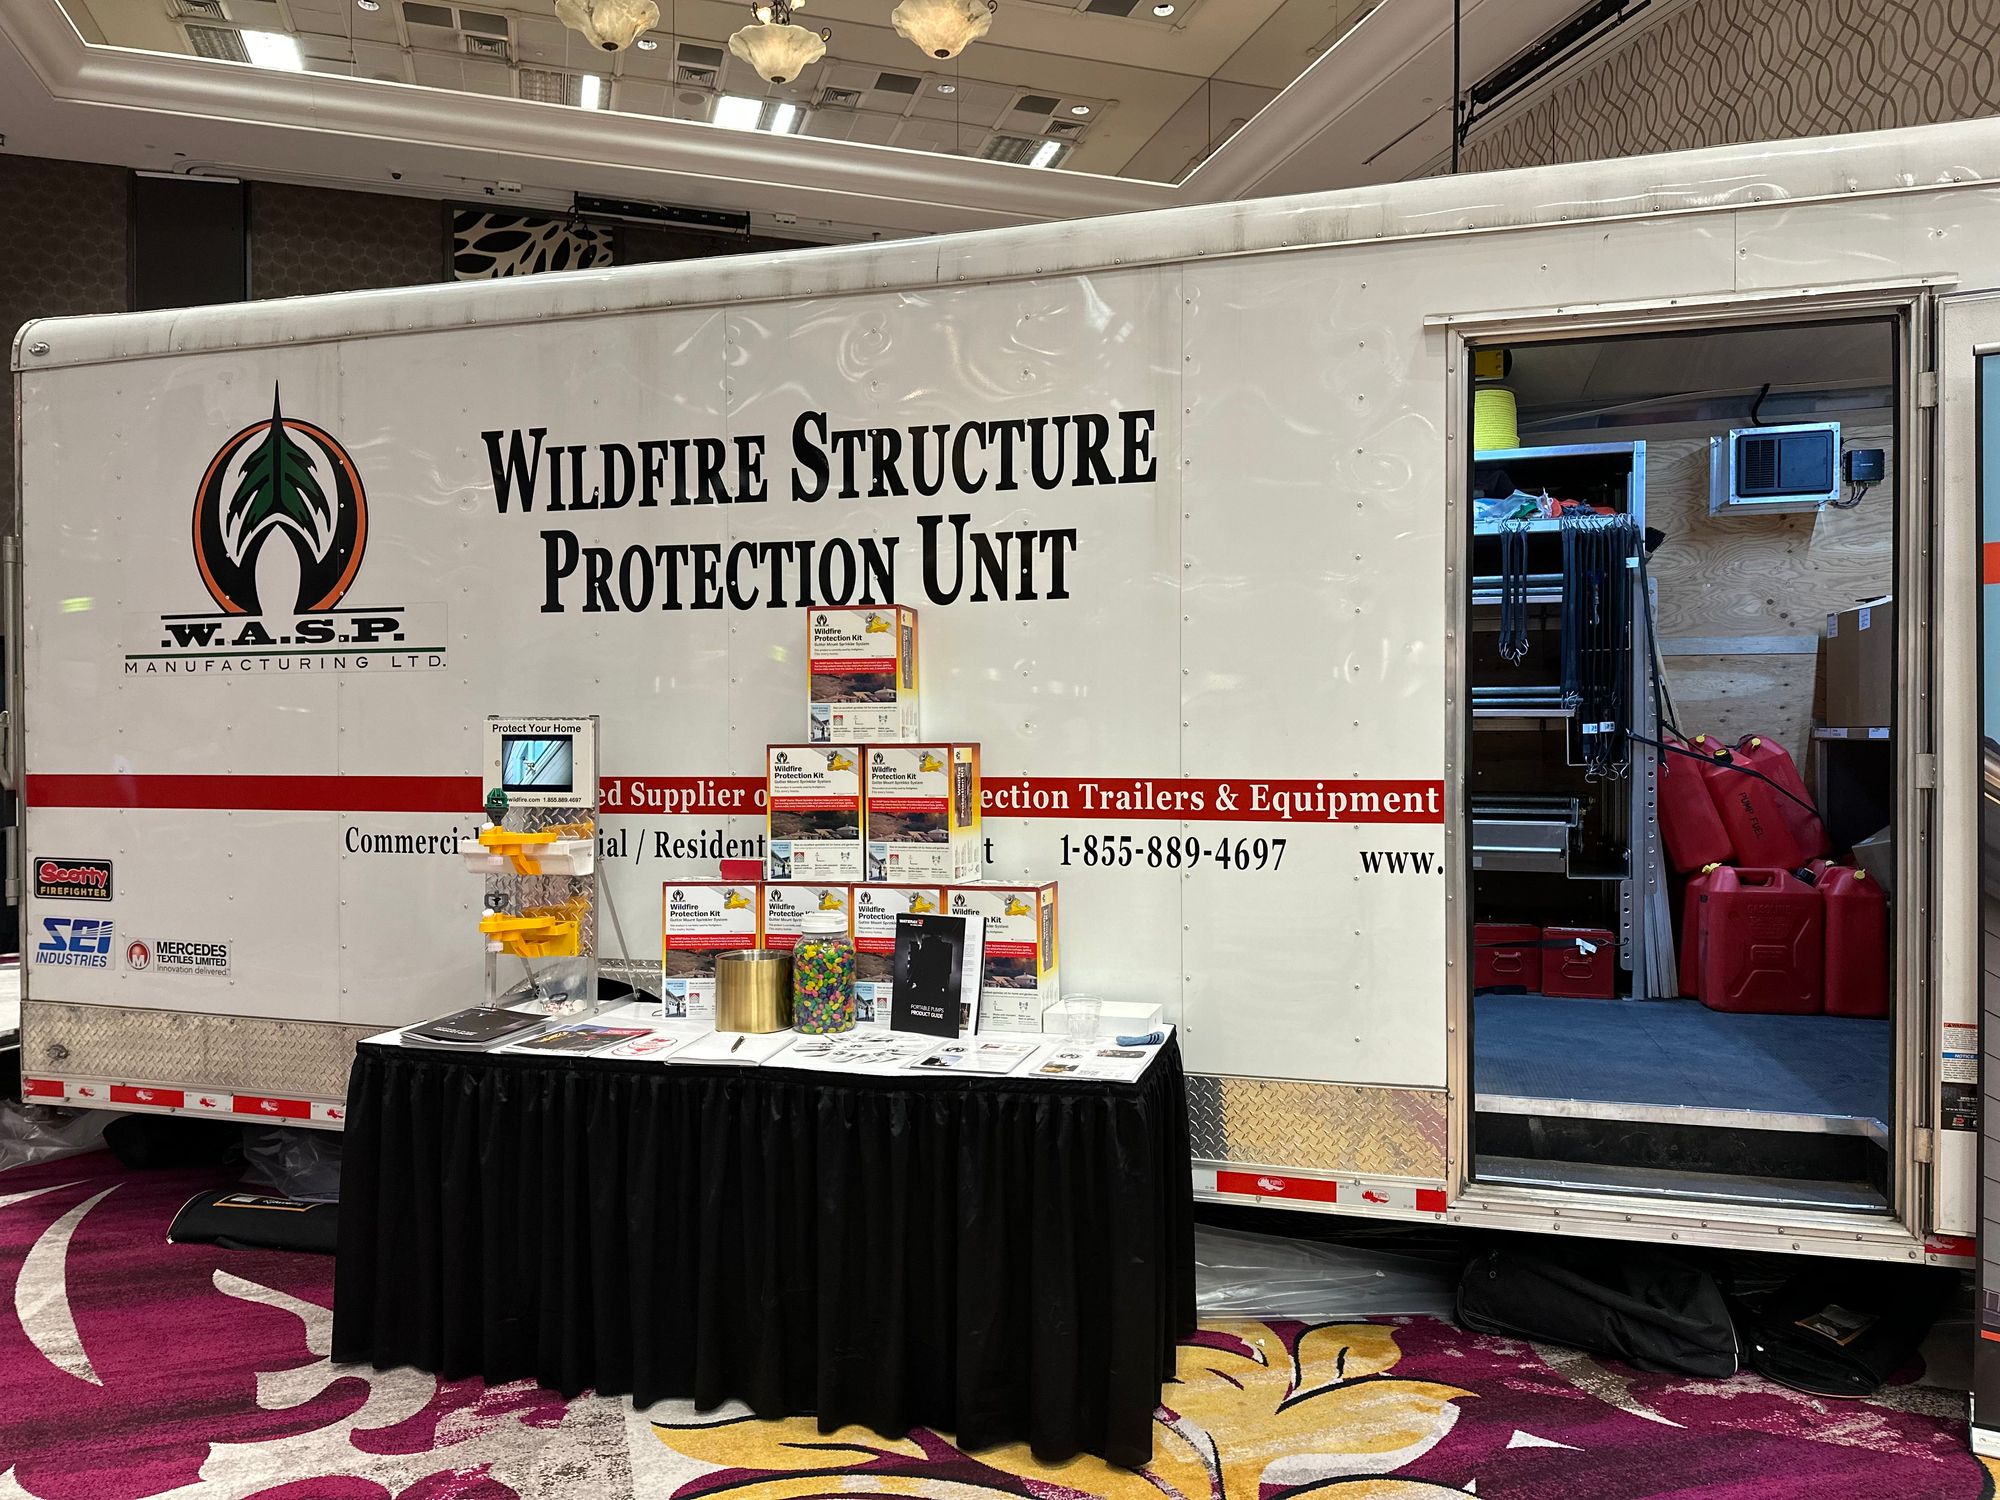 WATERAX at the WILDLAND URBAN INTERFACE CONFERENCE March 26 - 28, 2024 Peppermill Resort, Reno, NV